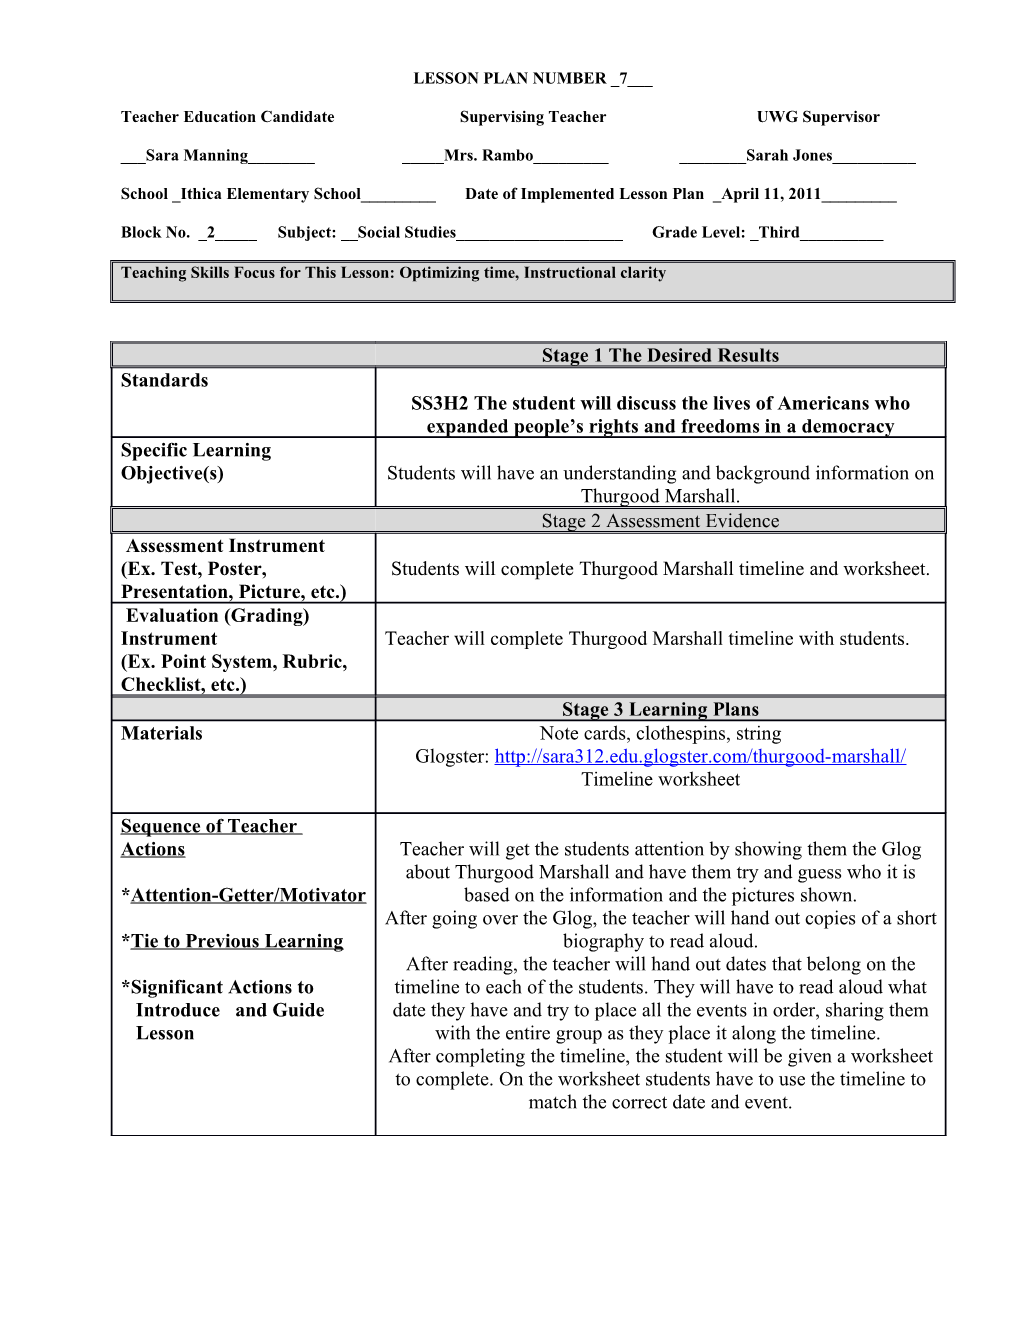 Lesson Planning Template s1